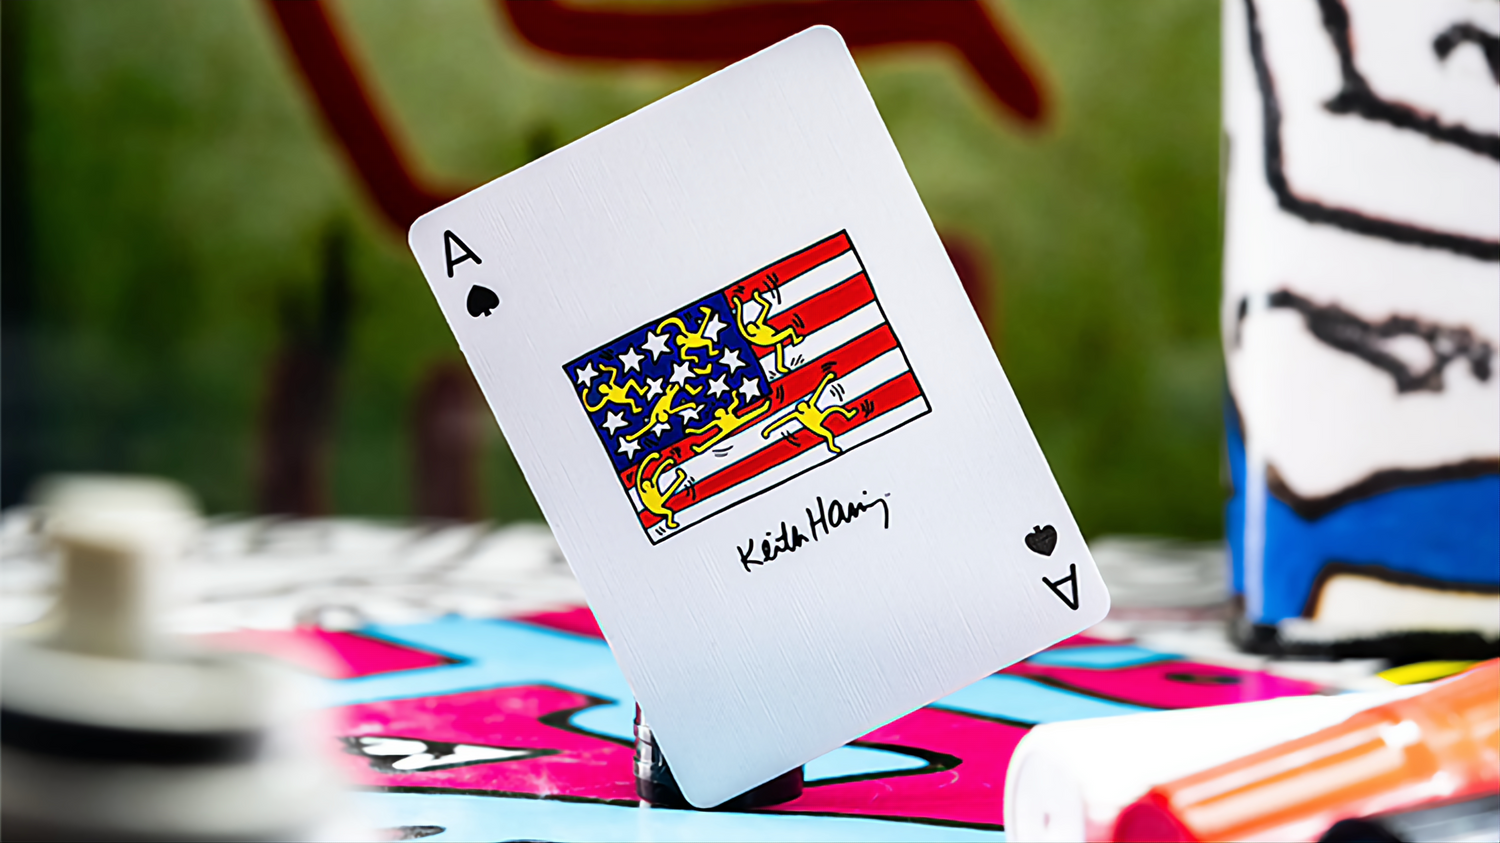 Keith Haring by theory11 : Playing cards, Poker, Magic, Cardistry,singapore